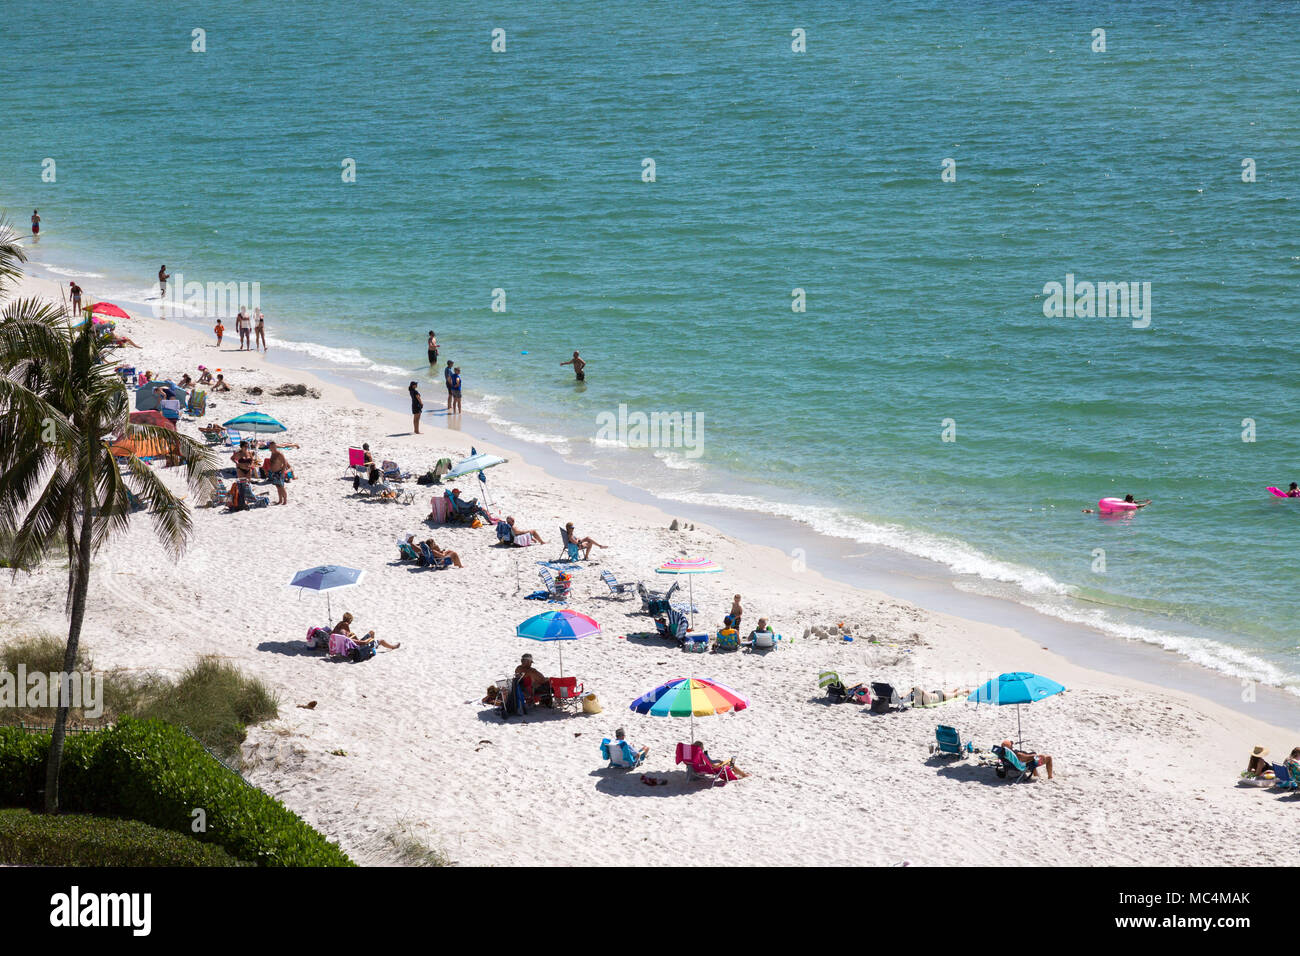 View from above of beach scene along the coast of Florida in Naples. Families vacationing over spring break. Colorful beach umbrellas. Stock Photo